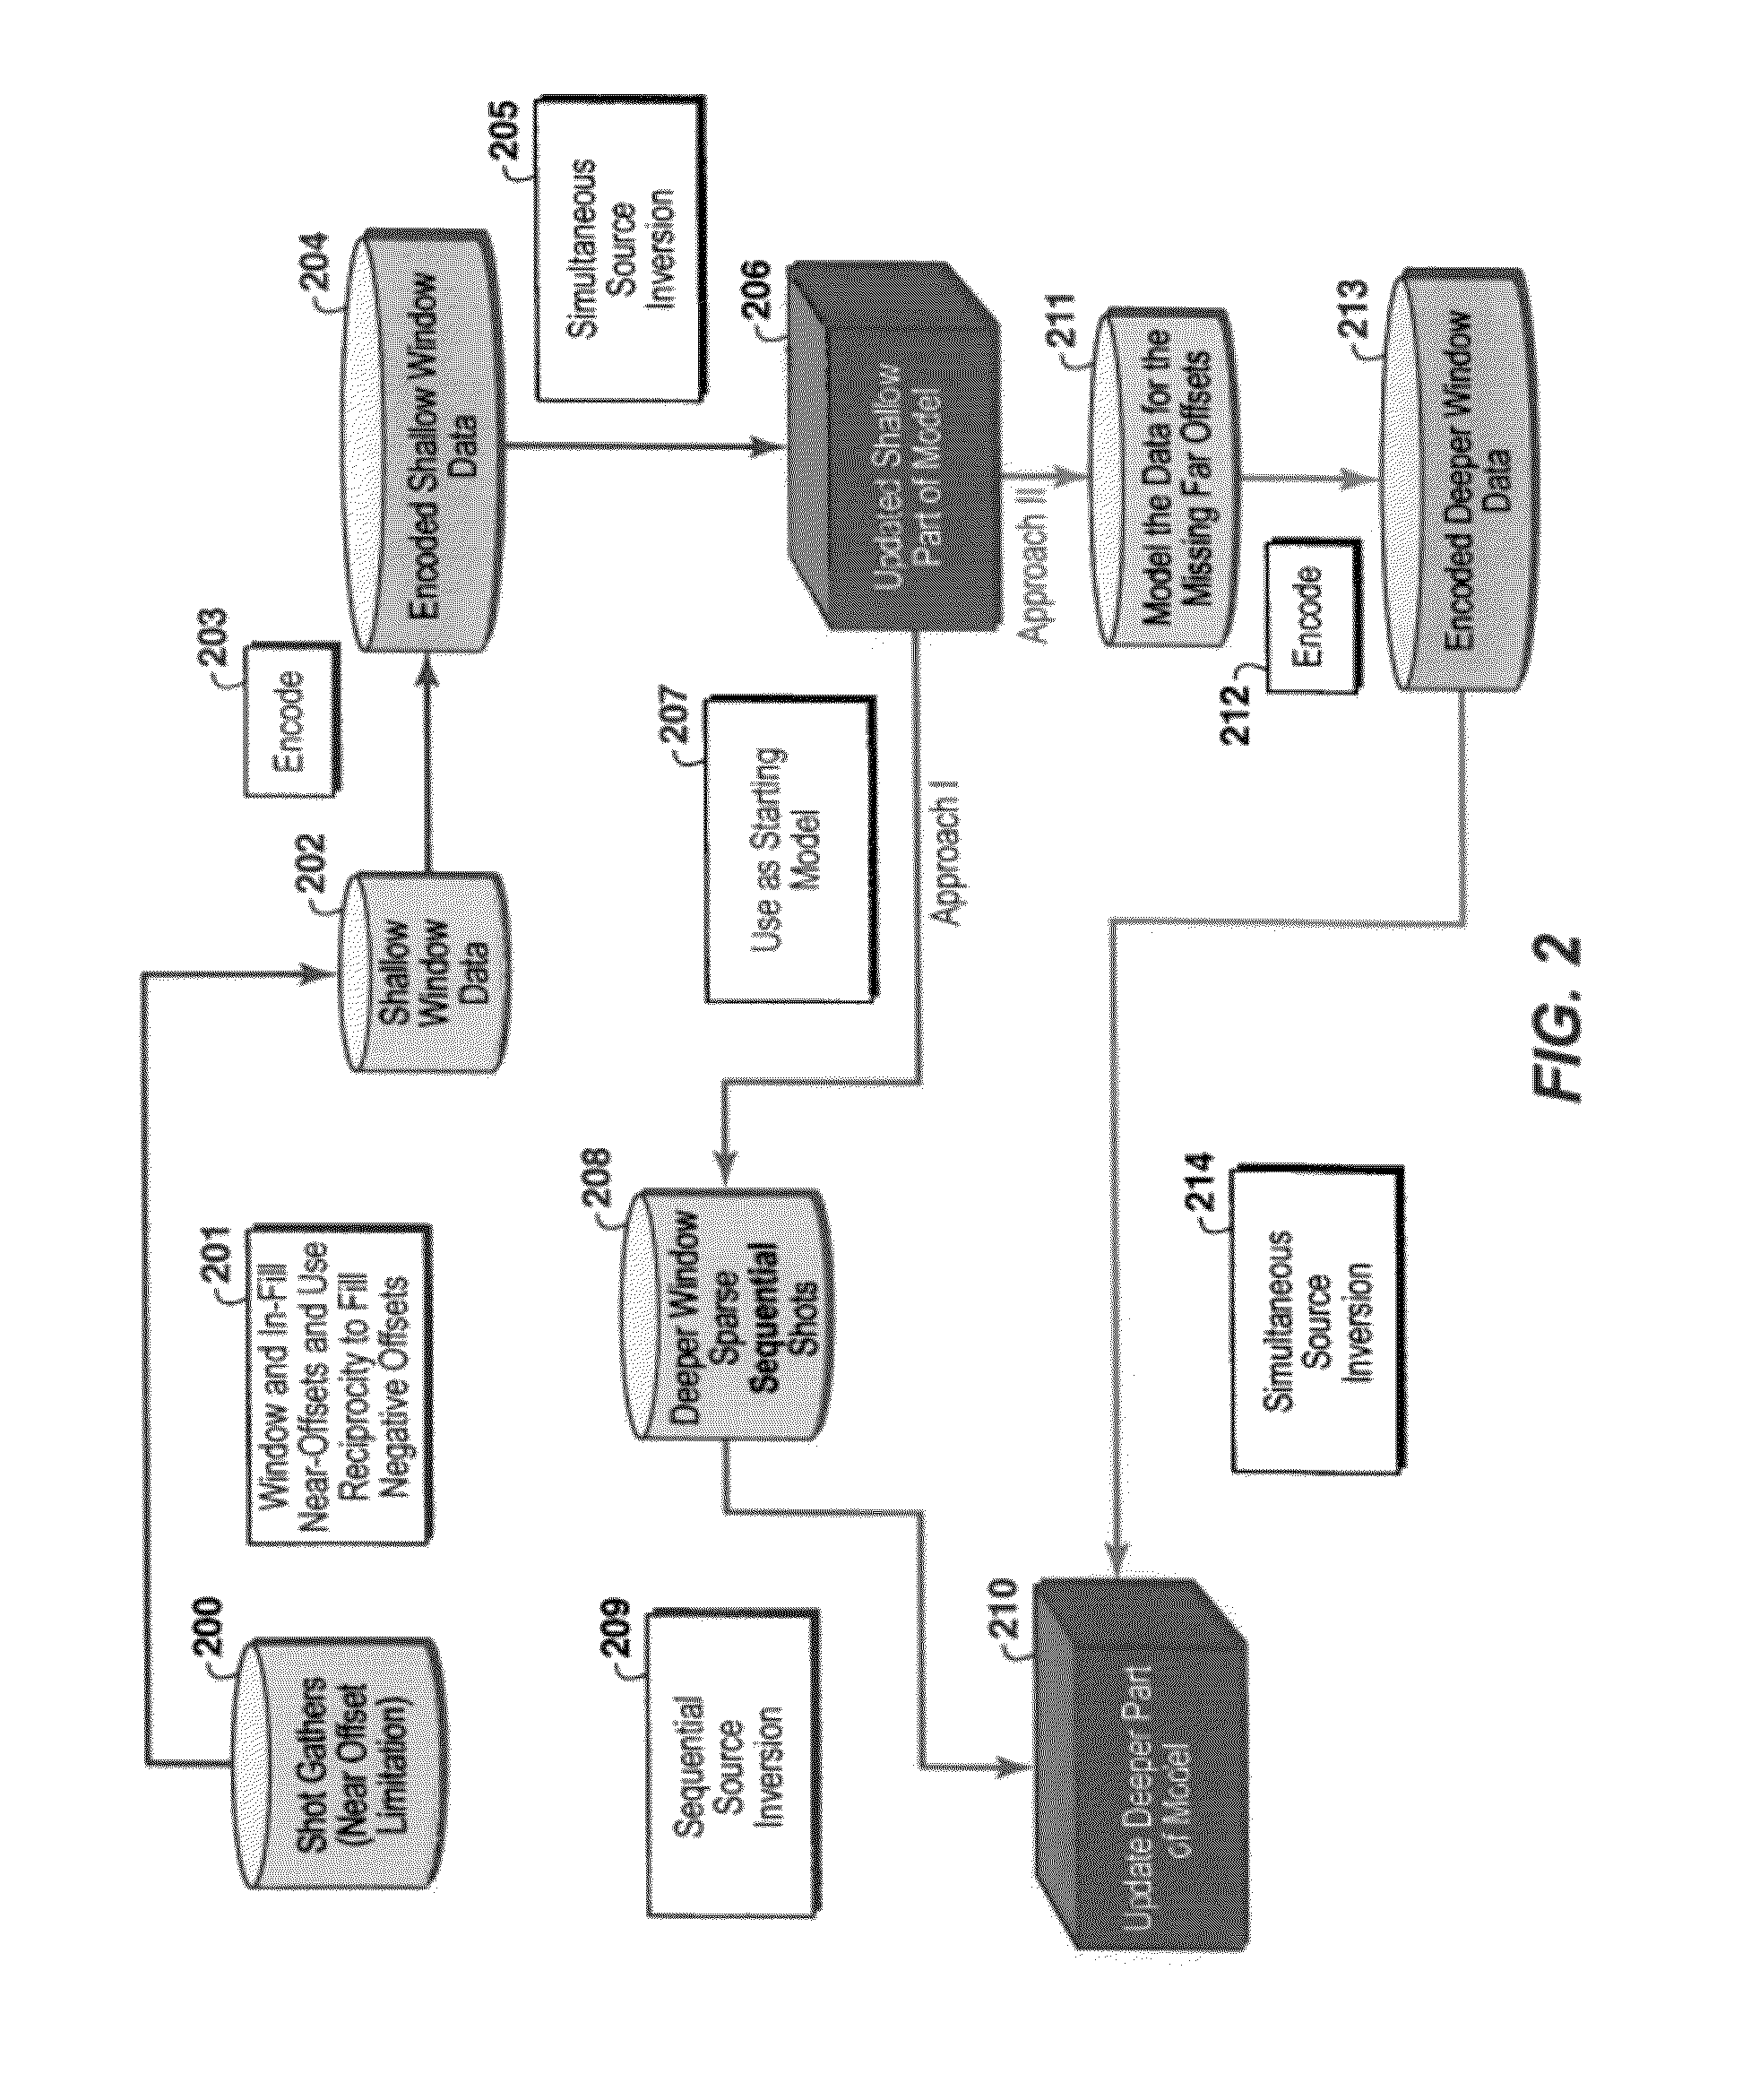 Hybrid method for full waveform inversion using simultaneous and sequential source method